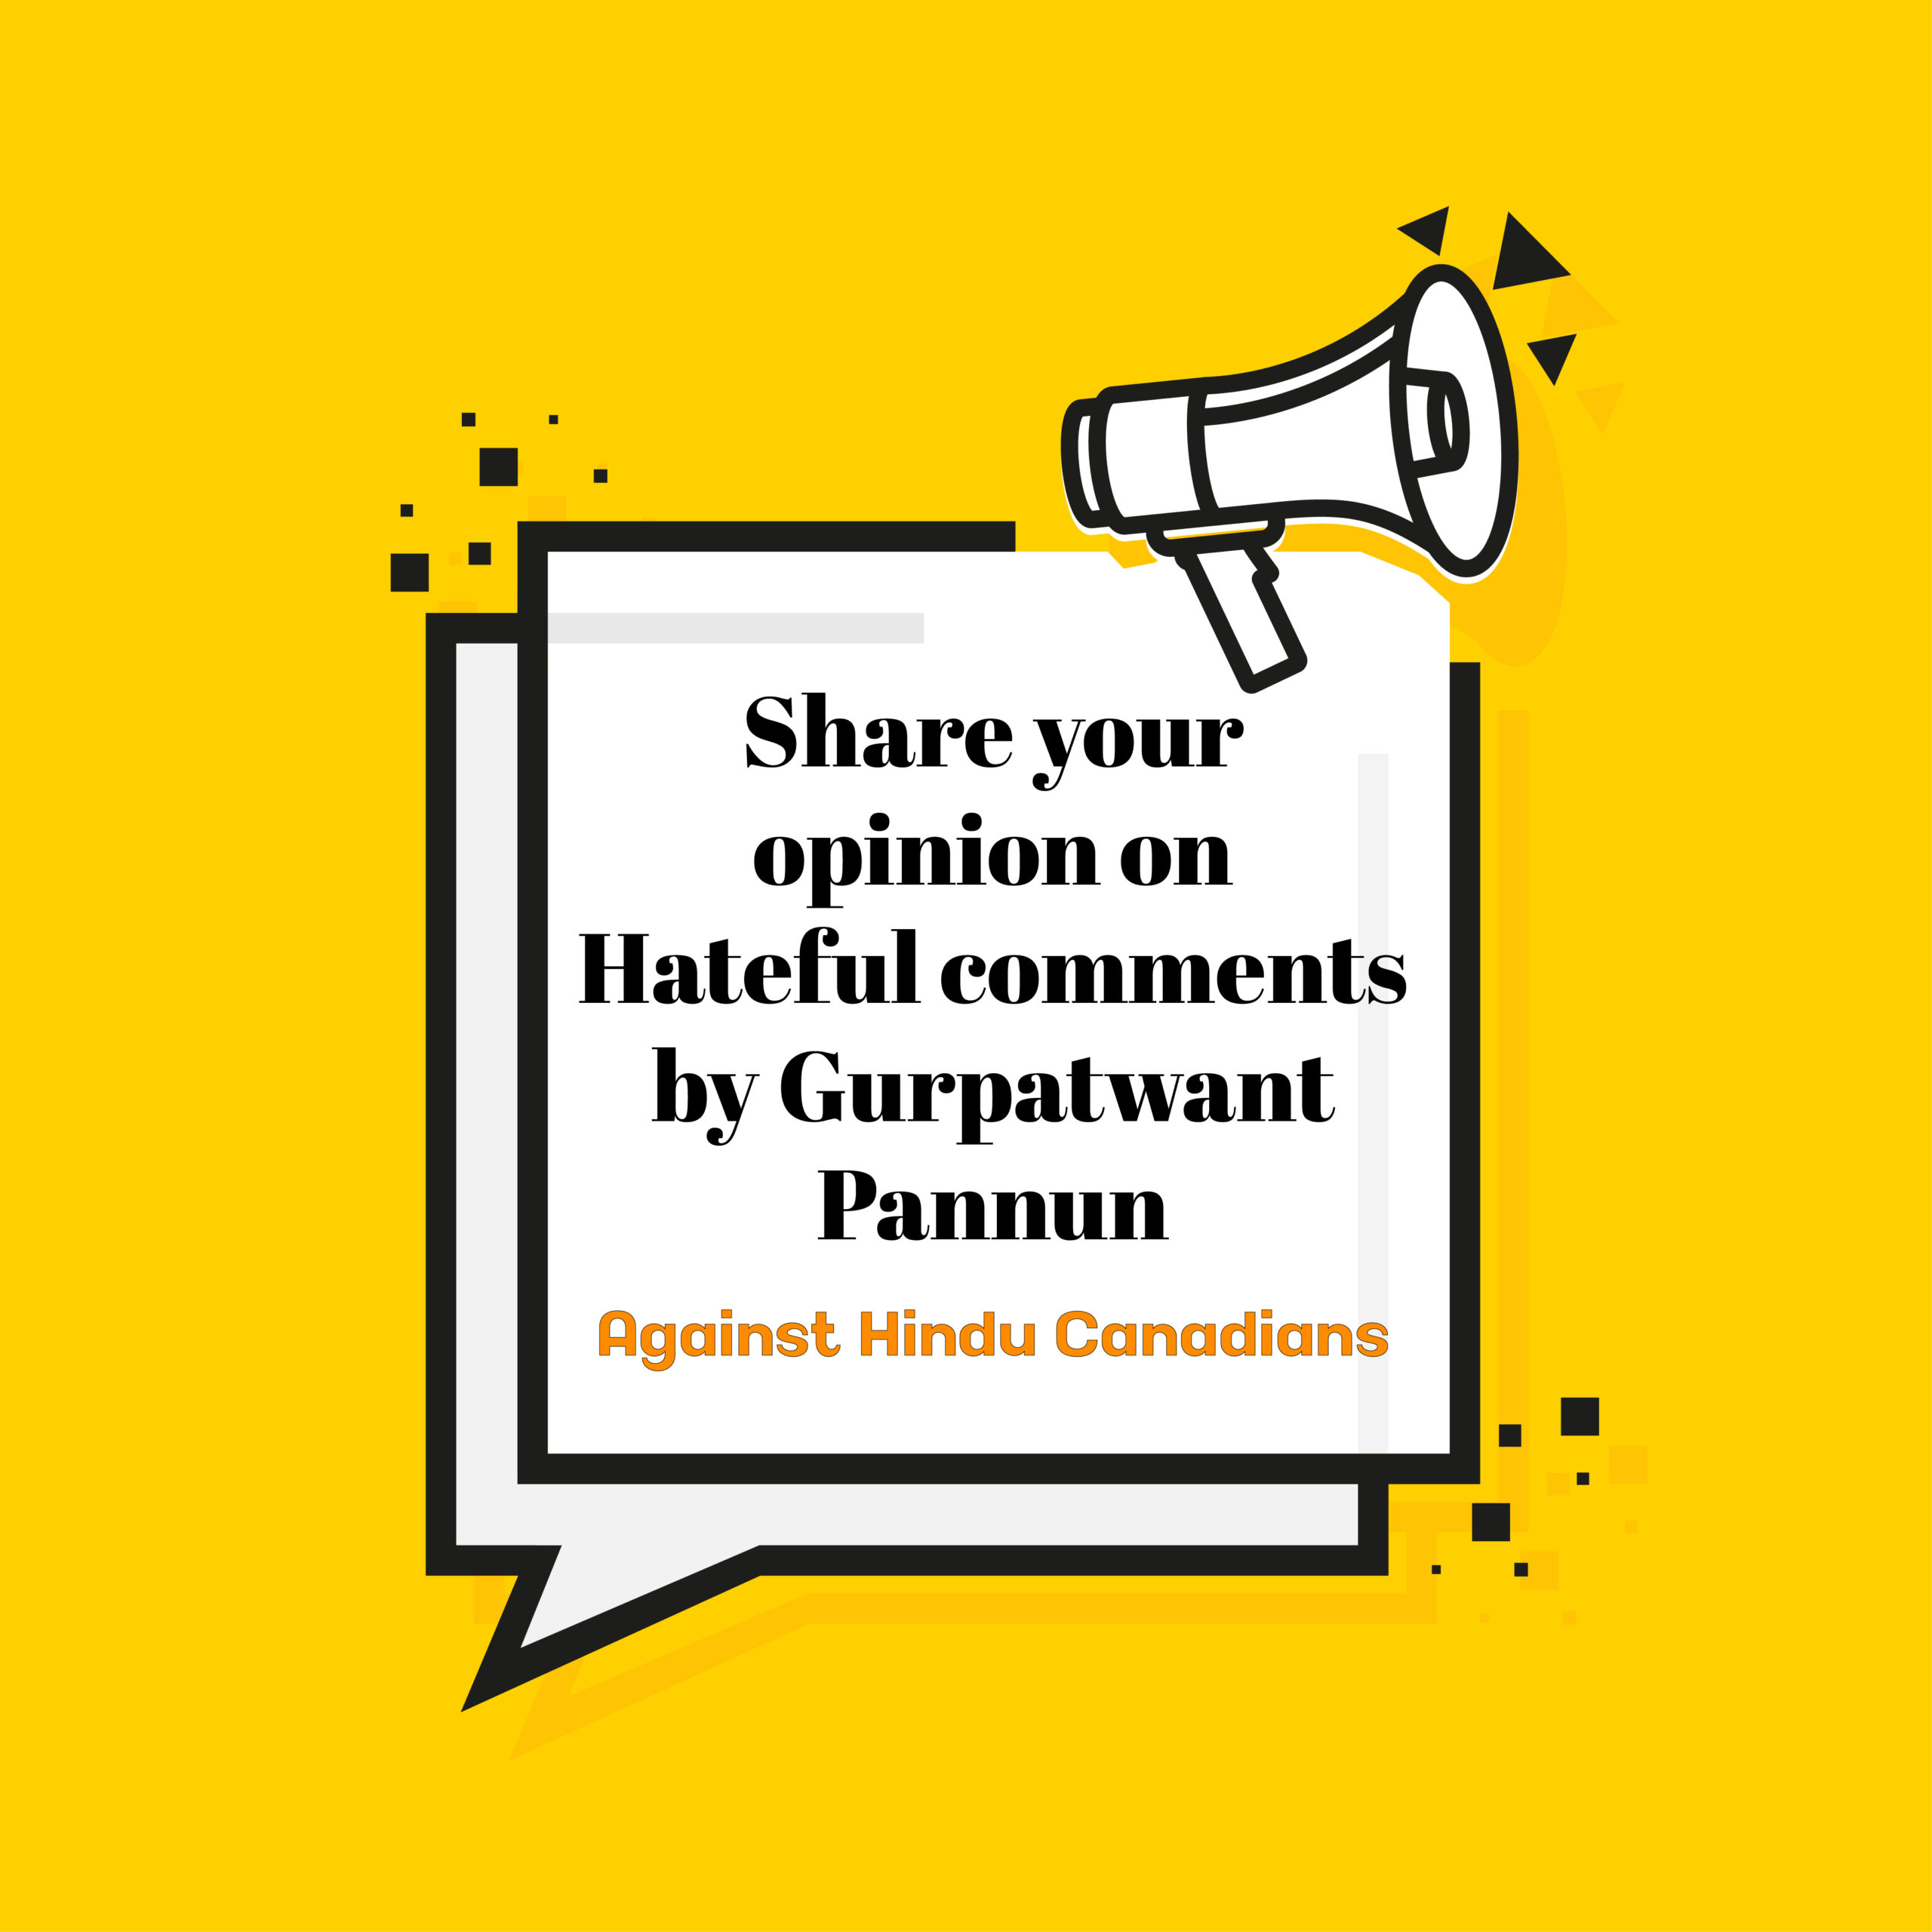 Share your opinion on Hateful comments by Gurpatwant Pannun